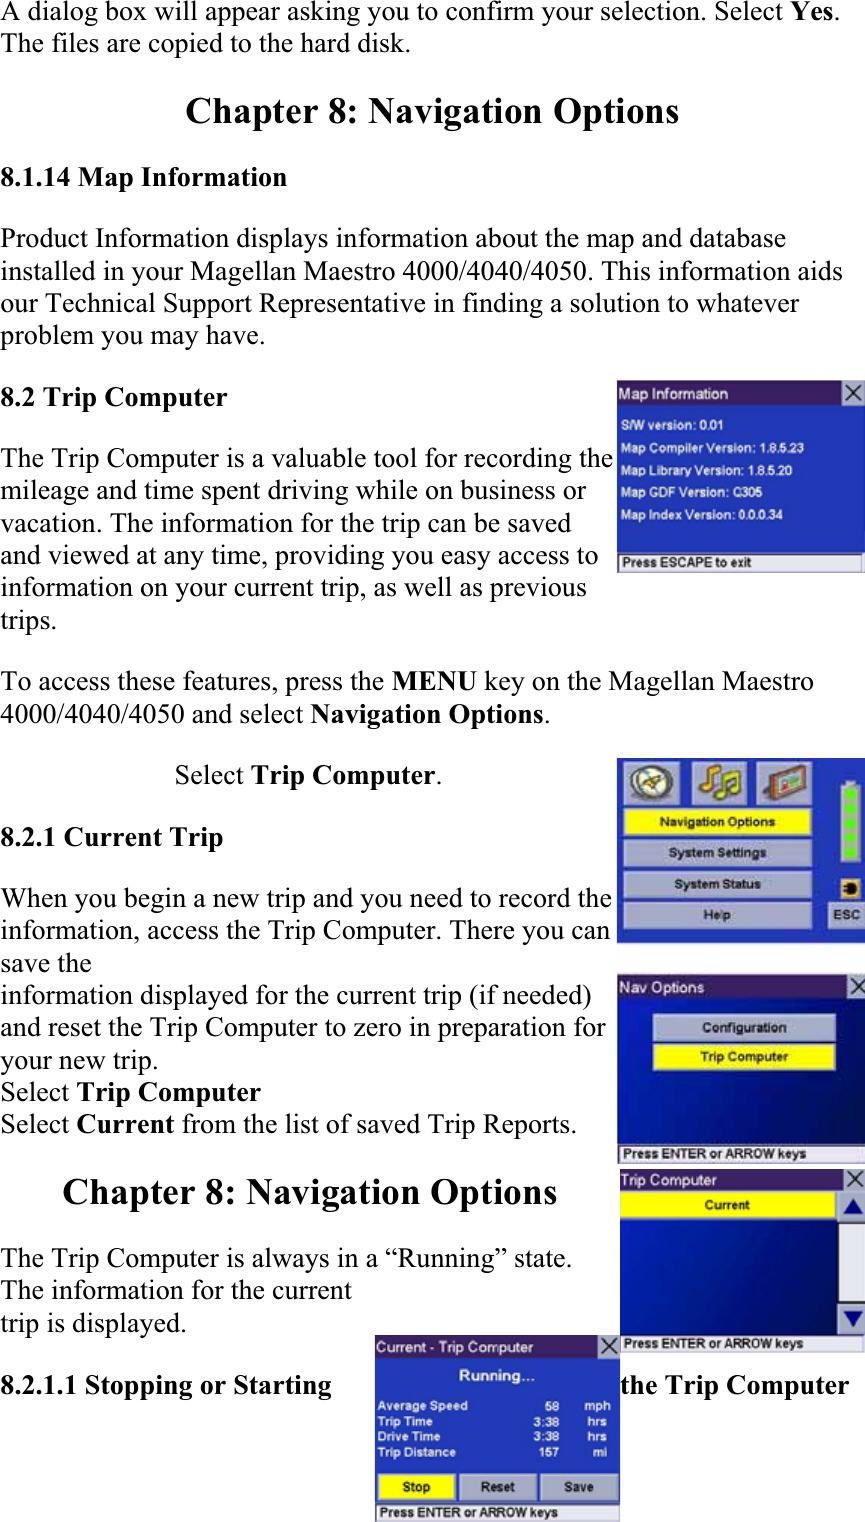 A dialog box will appear asking you to confirm your selection. Select Yes.The files are copied to the hard disk.  Chapter 8: Navigation Options 8.1.14 Map InformationProduct Information displays information about the map and database installed in your Magellan Maestro 4000/4040/4050. This information aids our Technical Support Representative in finding a solution to whatever problem you may have.  8.2 Trip ComputerThe Trip Computer is a valuable tool for recording the mileage and time spent driving while on business or vacation. The information for the trip can be saved and viewed at any time, providing you easy access to information on your current trip, as well as previous trips.To access these features, press the MENU key on the Magellan Maestro 4000/4040/4050 and select Navigation Options.Select Trip Computer.8.2.1 Current TripWhen you begin a new trip and you need to record the information, access the Trip Computer. There you can save theinformation displayed for the current trip (if needed) and reset the Trip Computer to zero in preparation for your new trip. Select Trip Computer Select Current from the list of saved Trip Reports. Chapter 8: Navigation Options The Trip Computer is always in a “Running” state. The information for the current trip is displayed.  8.2.1.1 Stopping or Starting  the Trip Computer